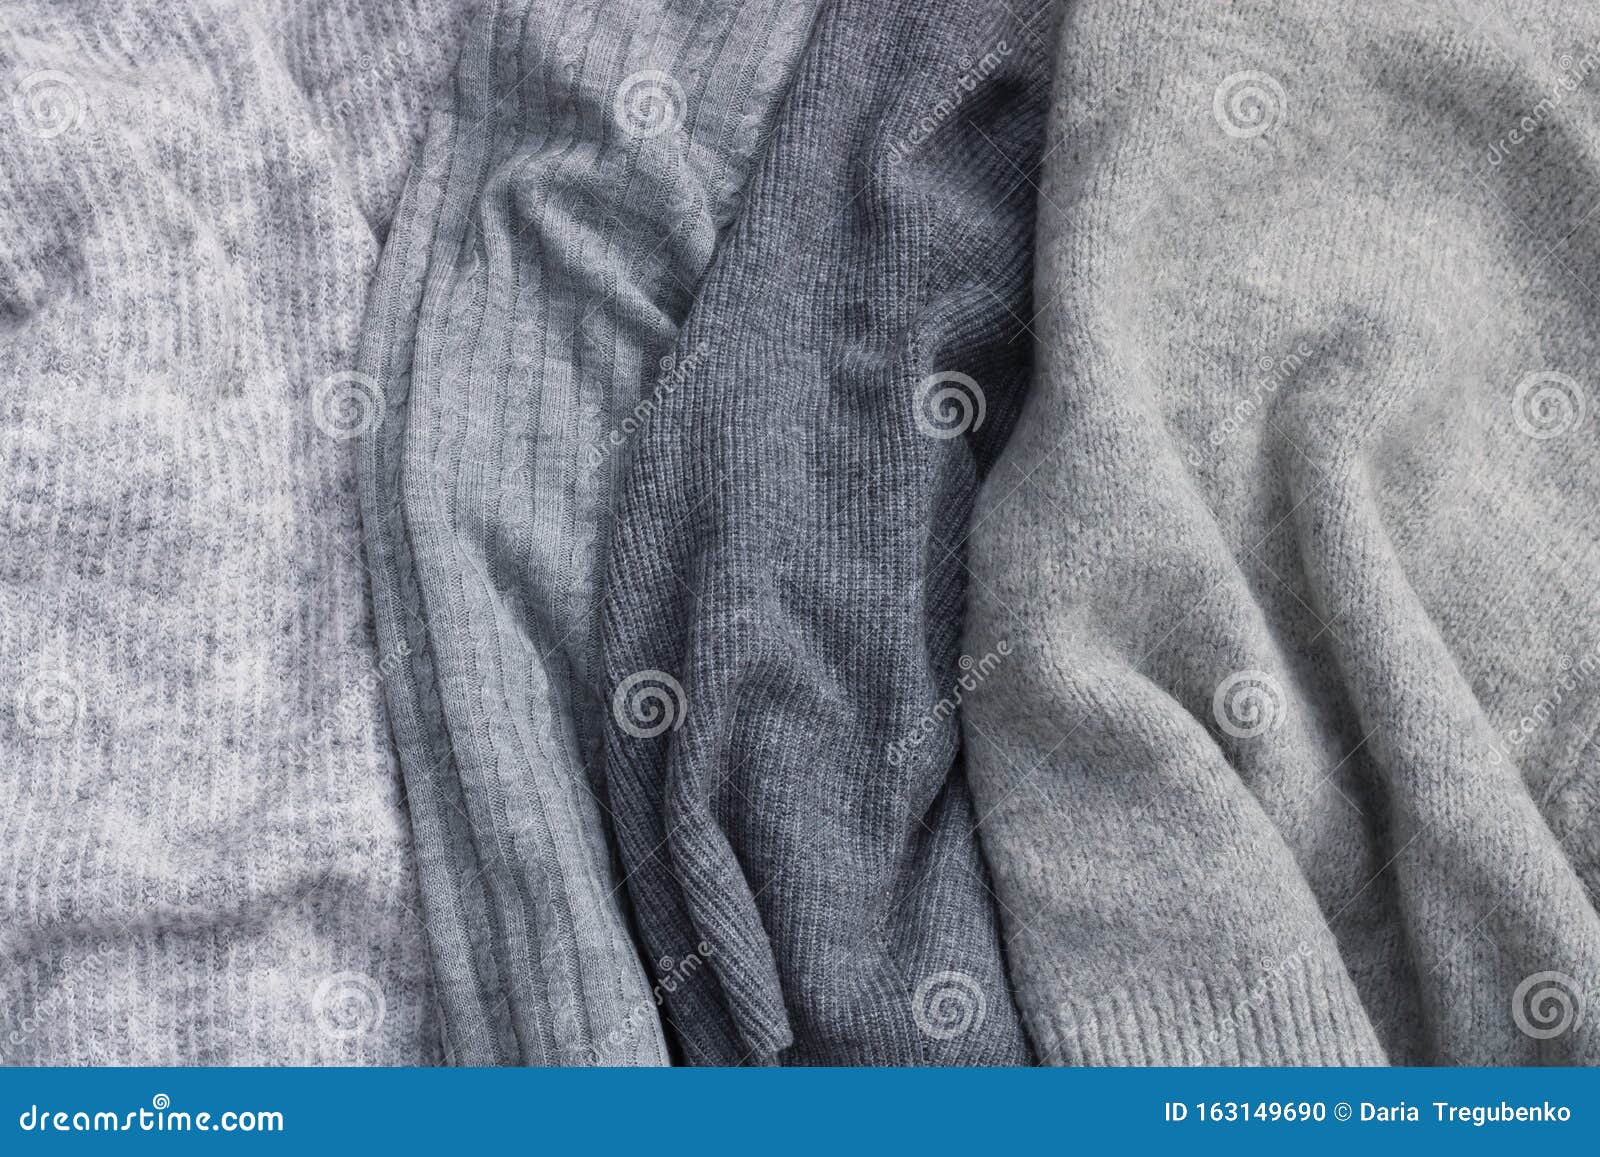 Four Knitted Gray Sweaters. Different Shades of Gray Stock Photo ...